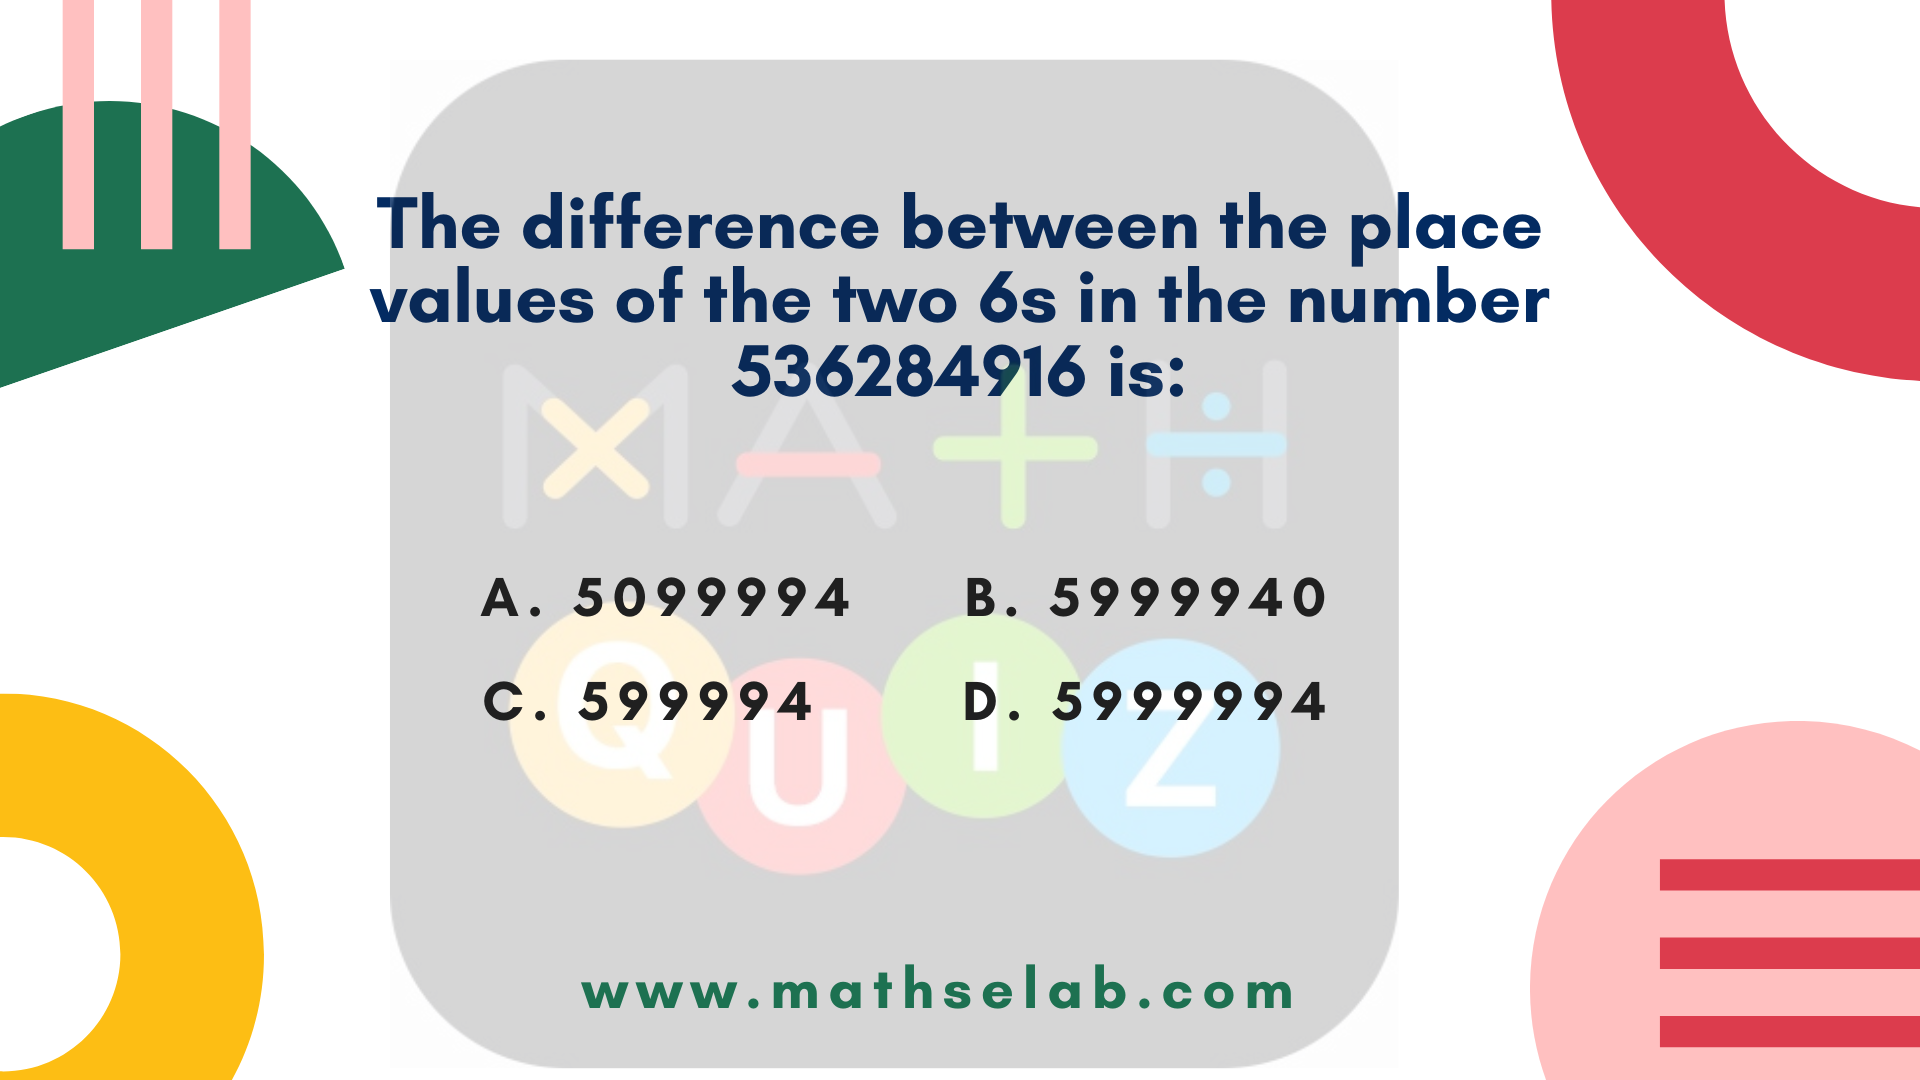 The difference between the place values of the two 6s in the number 536284916 is: